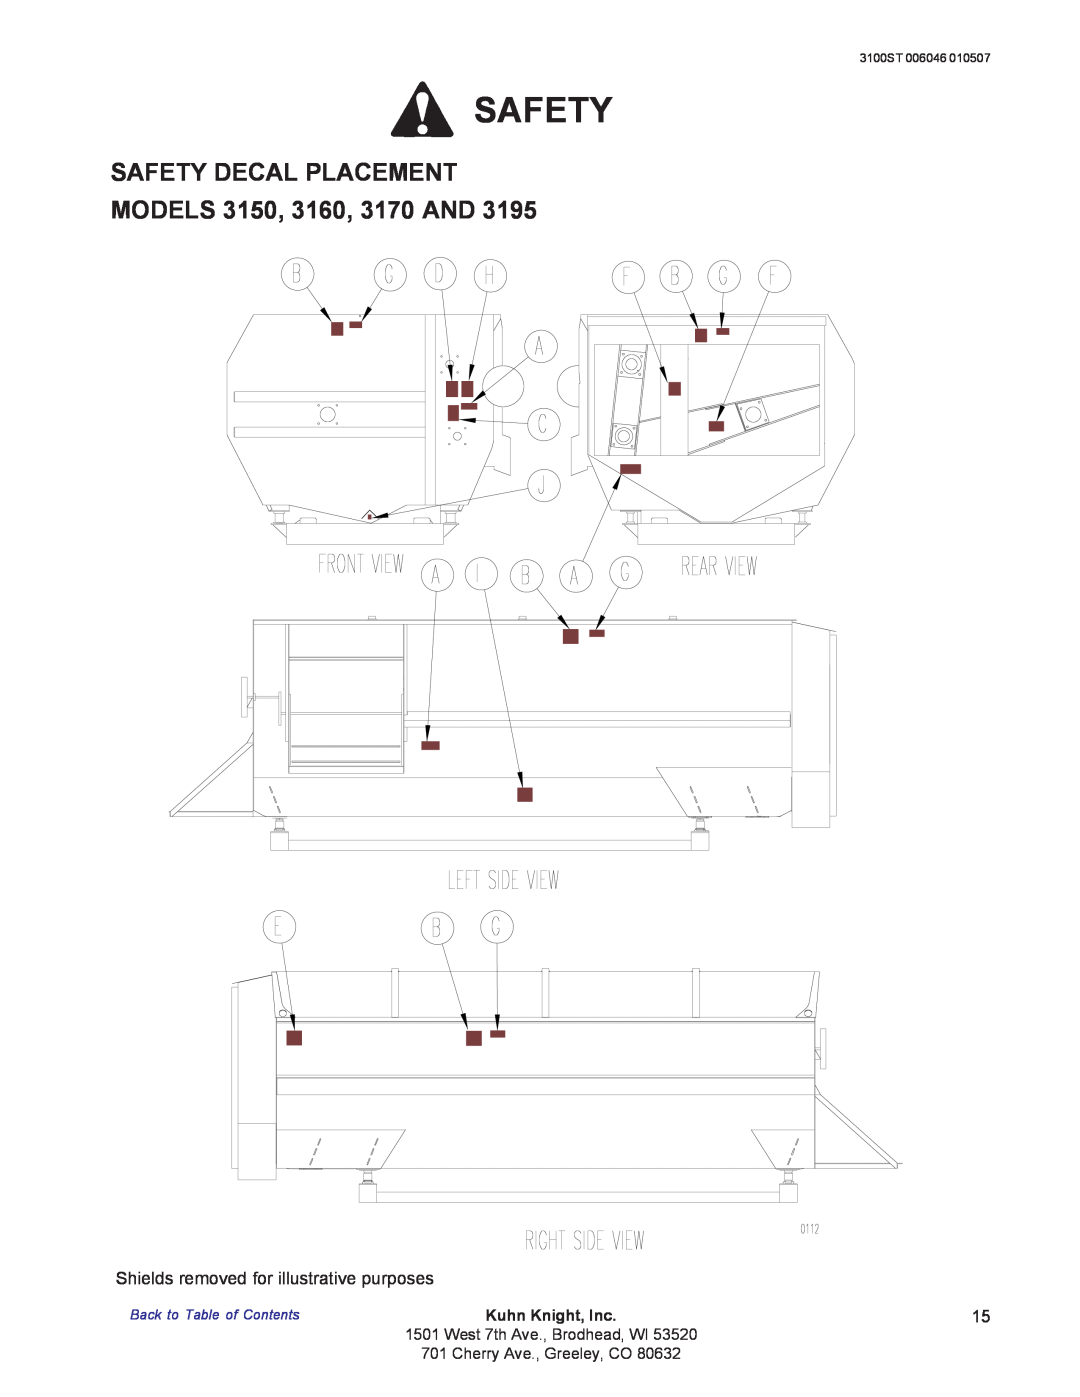 Kuhn Rikon 3100 SAFETY DECAL PLACEMENT MODELS 3150, 3160, 3170 AND, Safety, Back to Table of ContentsKuhn Knight, Inc.15 